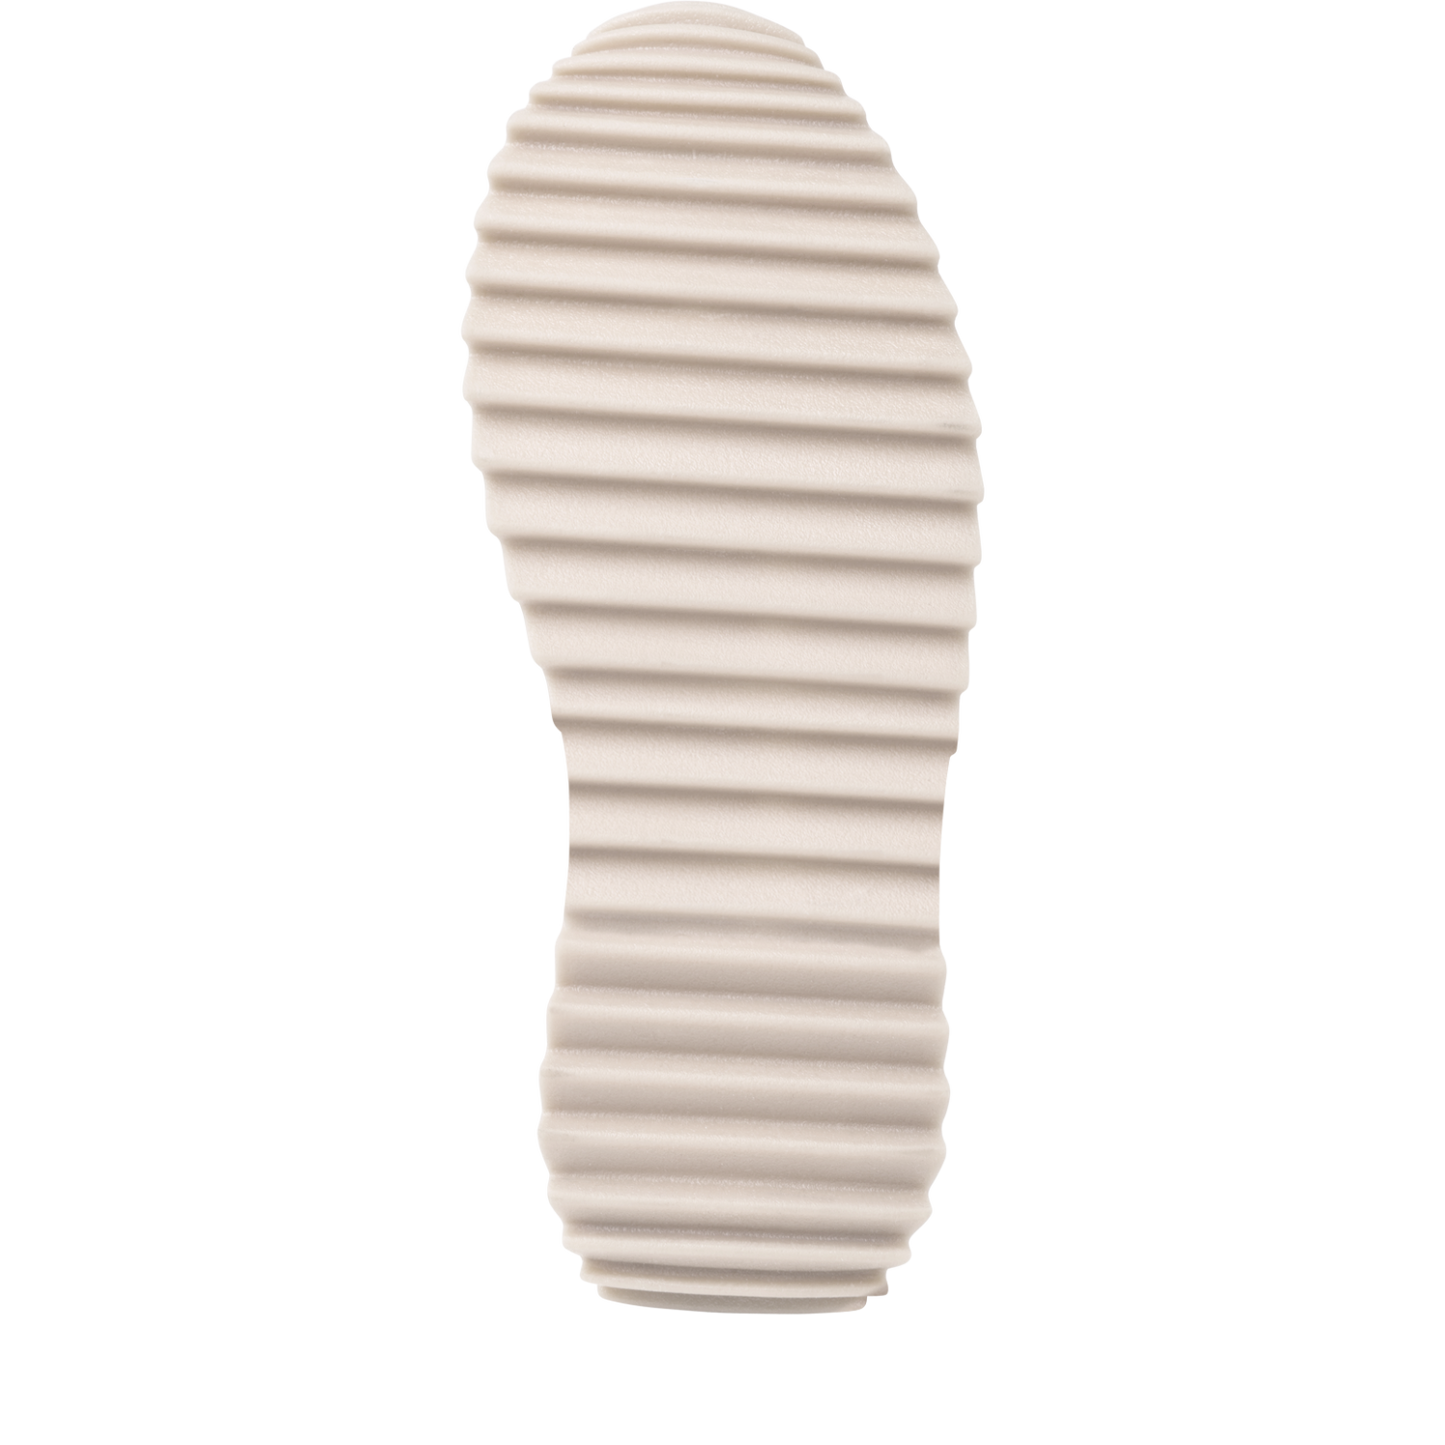 Chunky Platform Trainer in Ivory